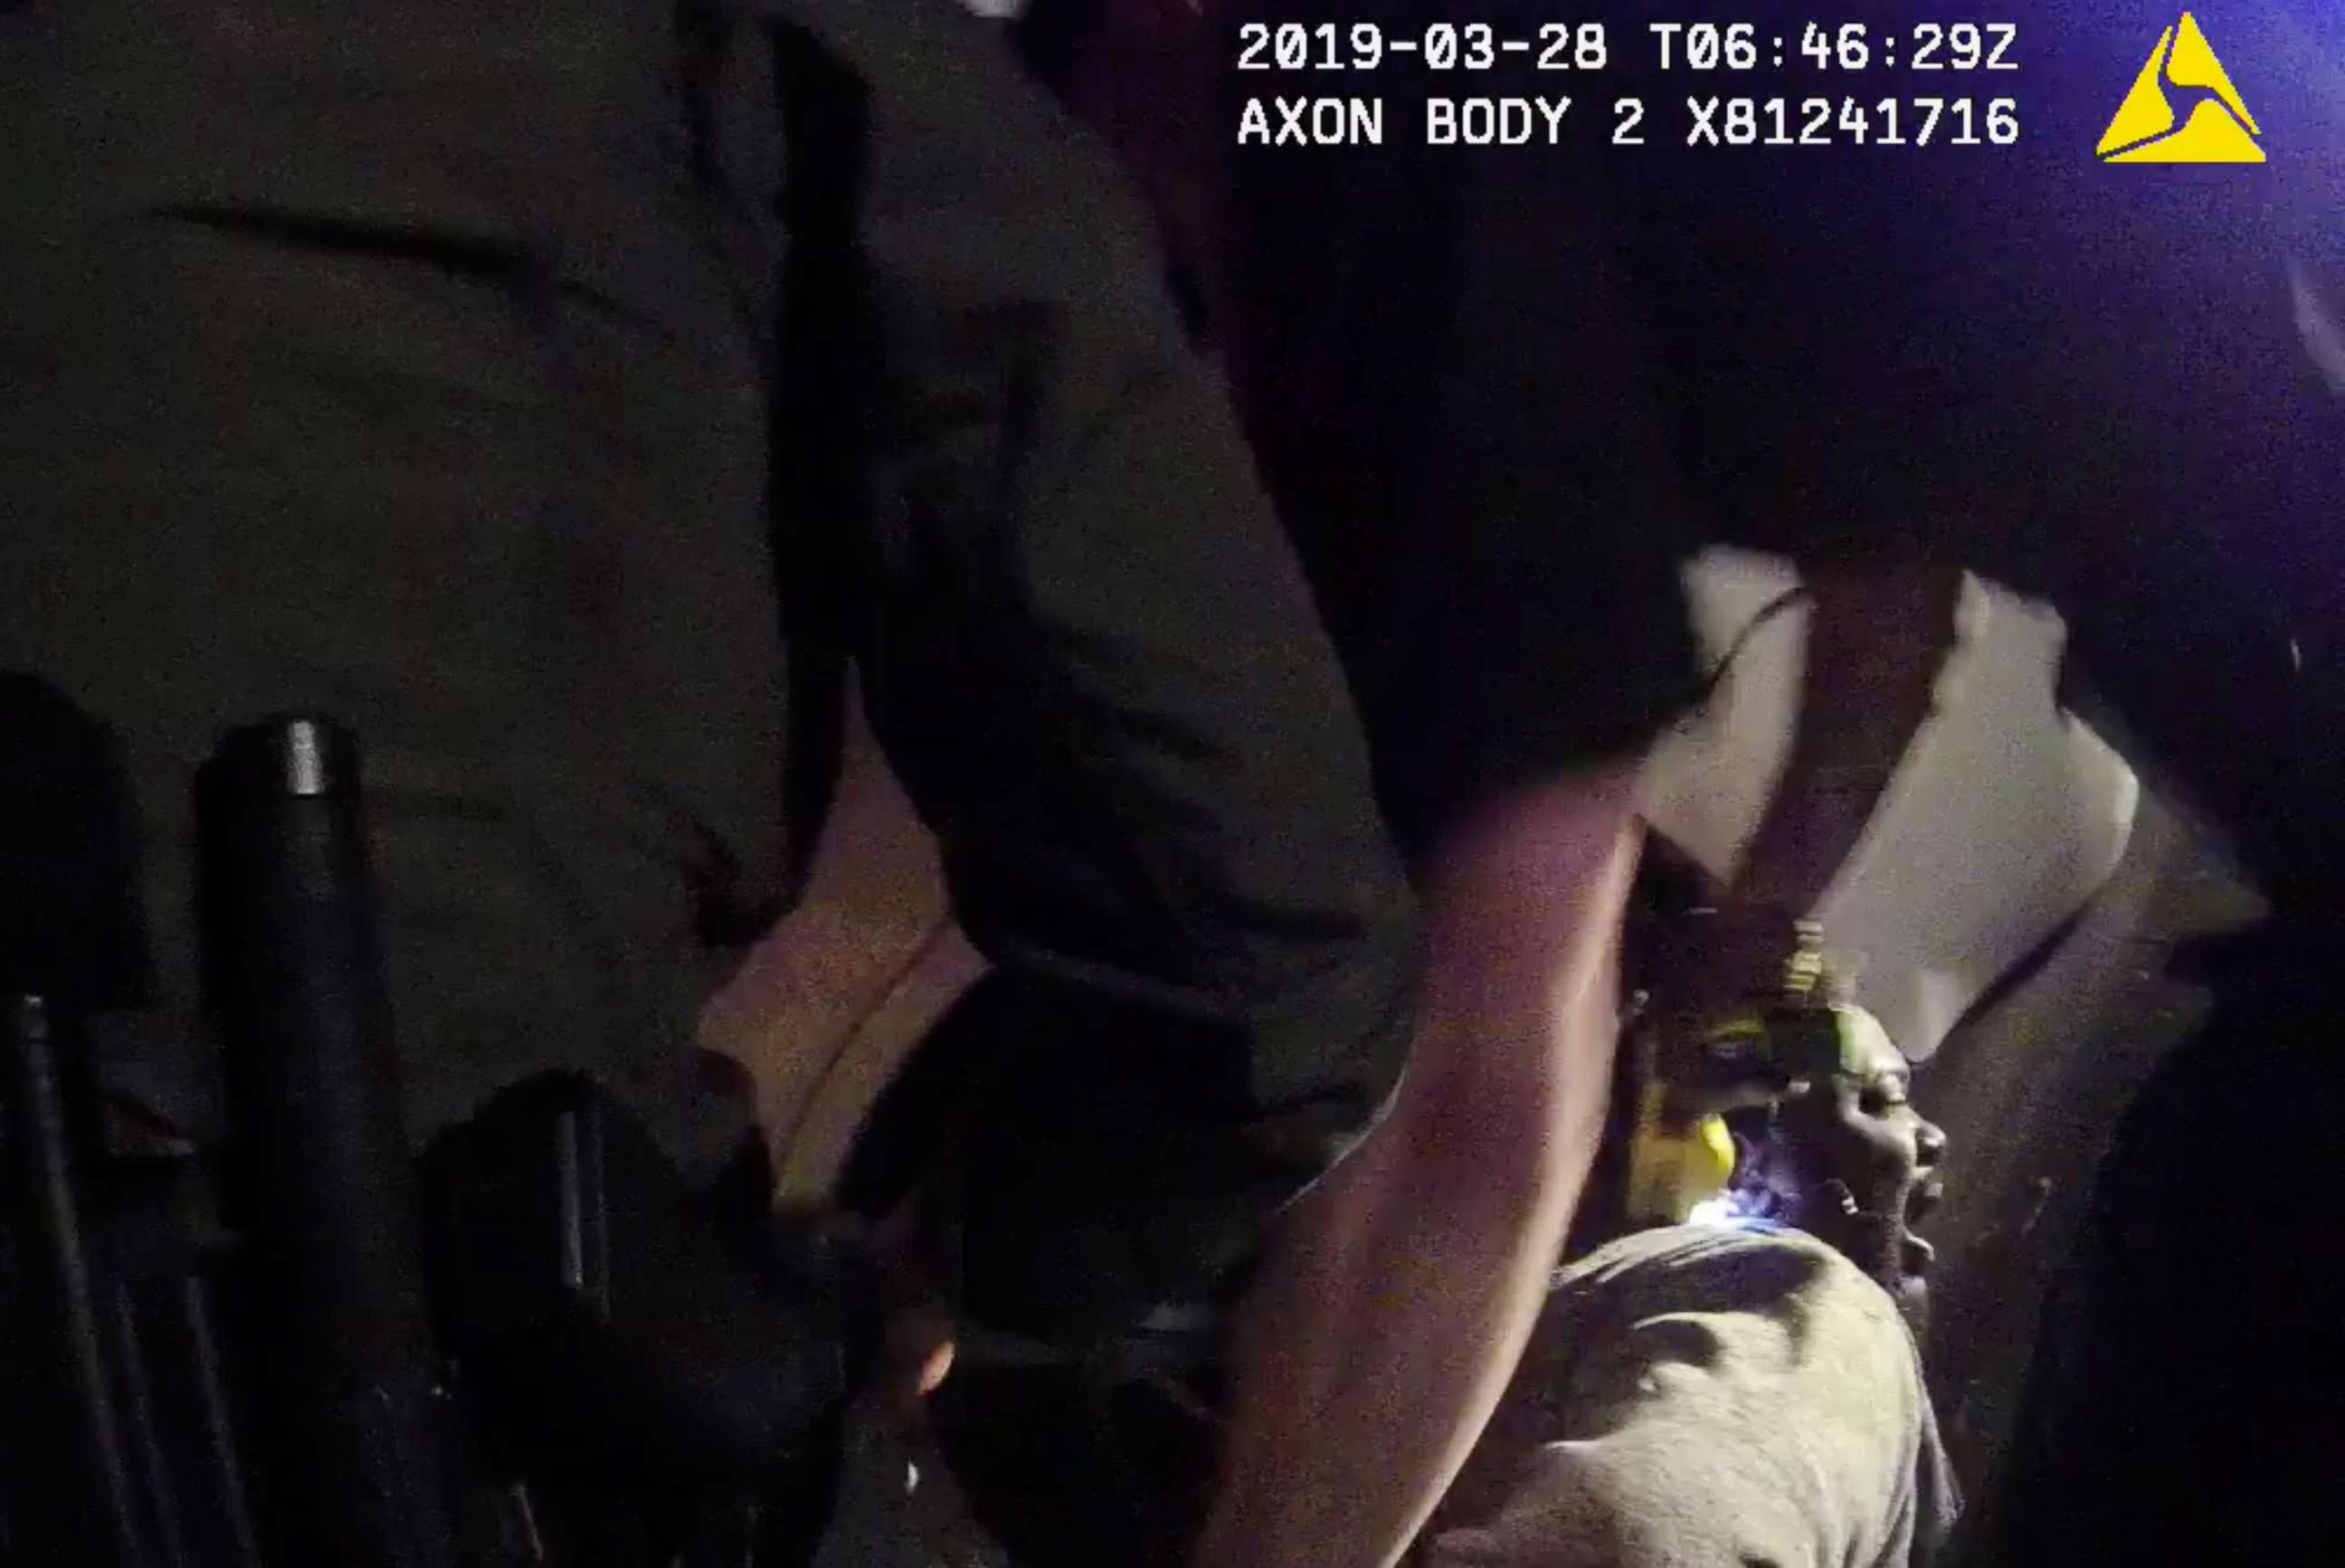 PHOTO: In this image made from a March 28, 2019, body-worn camera video provided by the Austin Police Department in Texas, Williamson County deputies hold down Javier Ambler as one of them uses a taser during his arrest in Austin, Texas. 